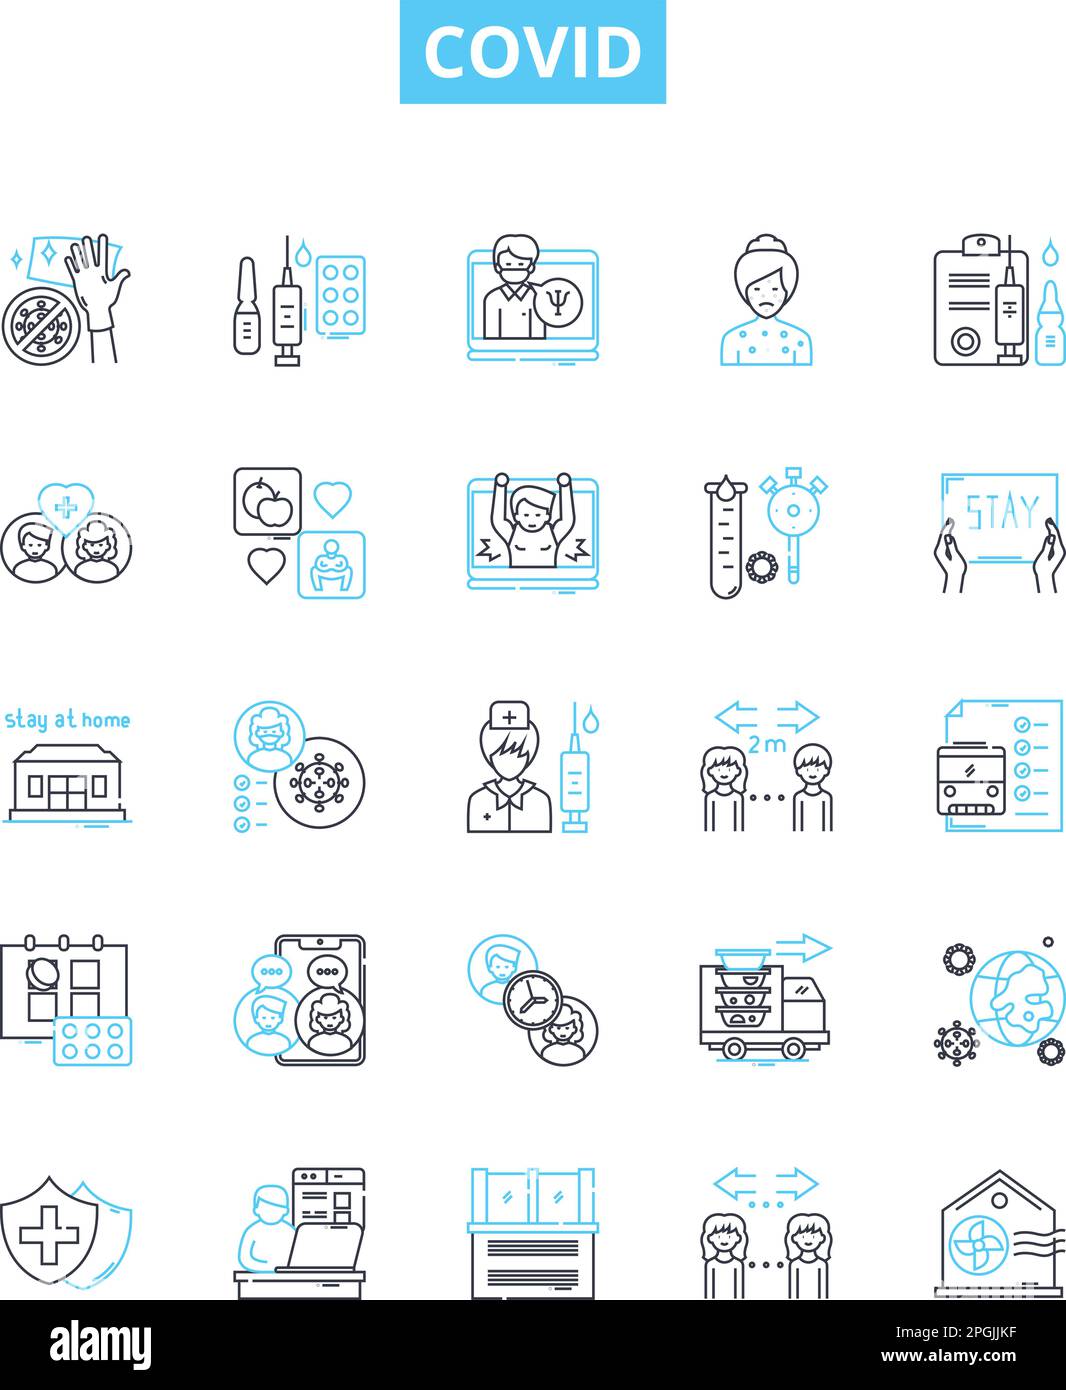 Covid vector line icons set. Covid, Pandemic, Virus, Coronavirus, Lockdown, Infection, Testing illustration outline concept symbols and signs Stock Vector